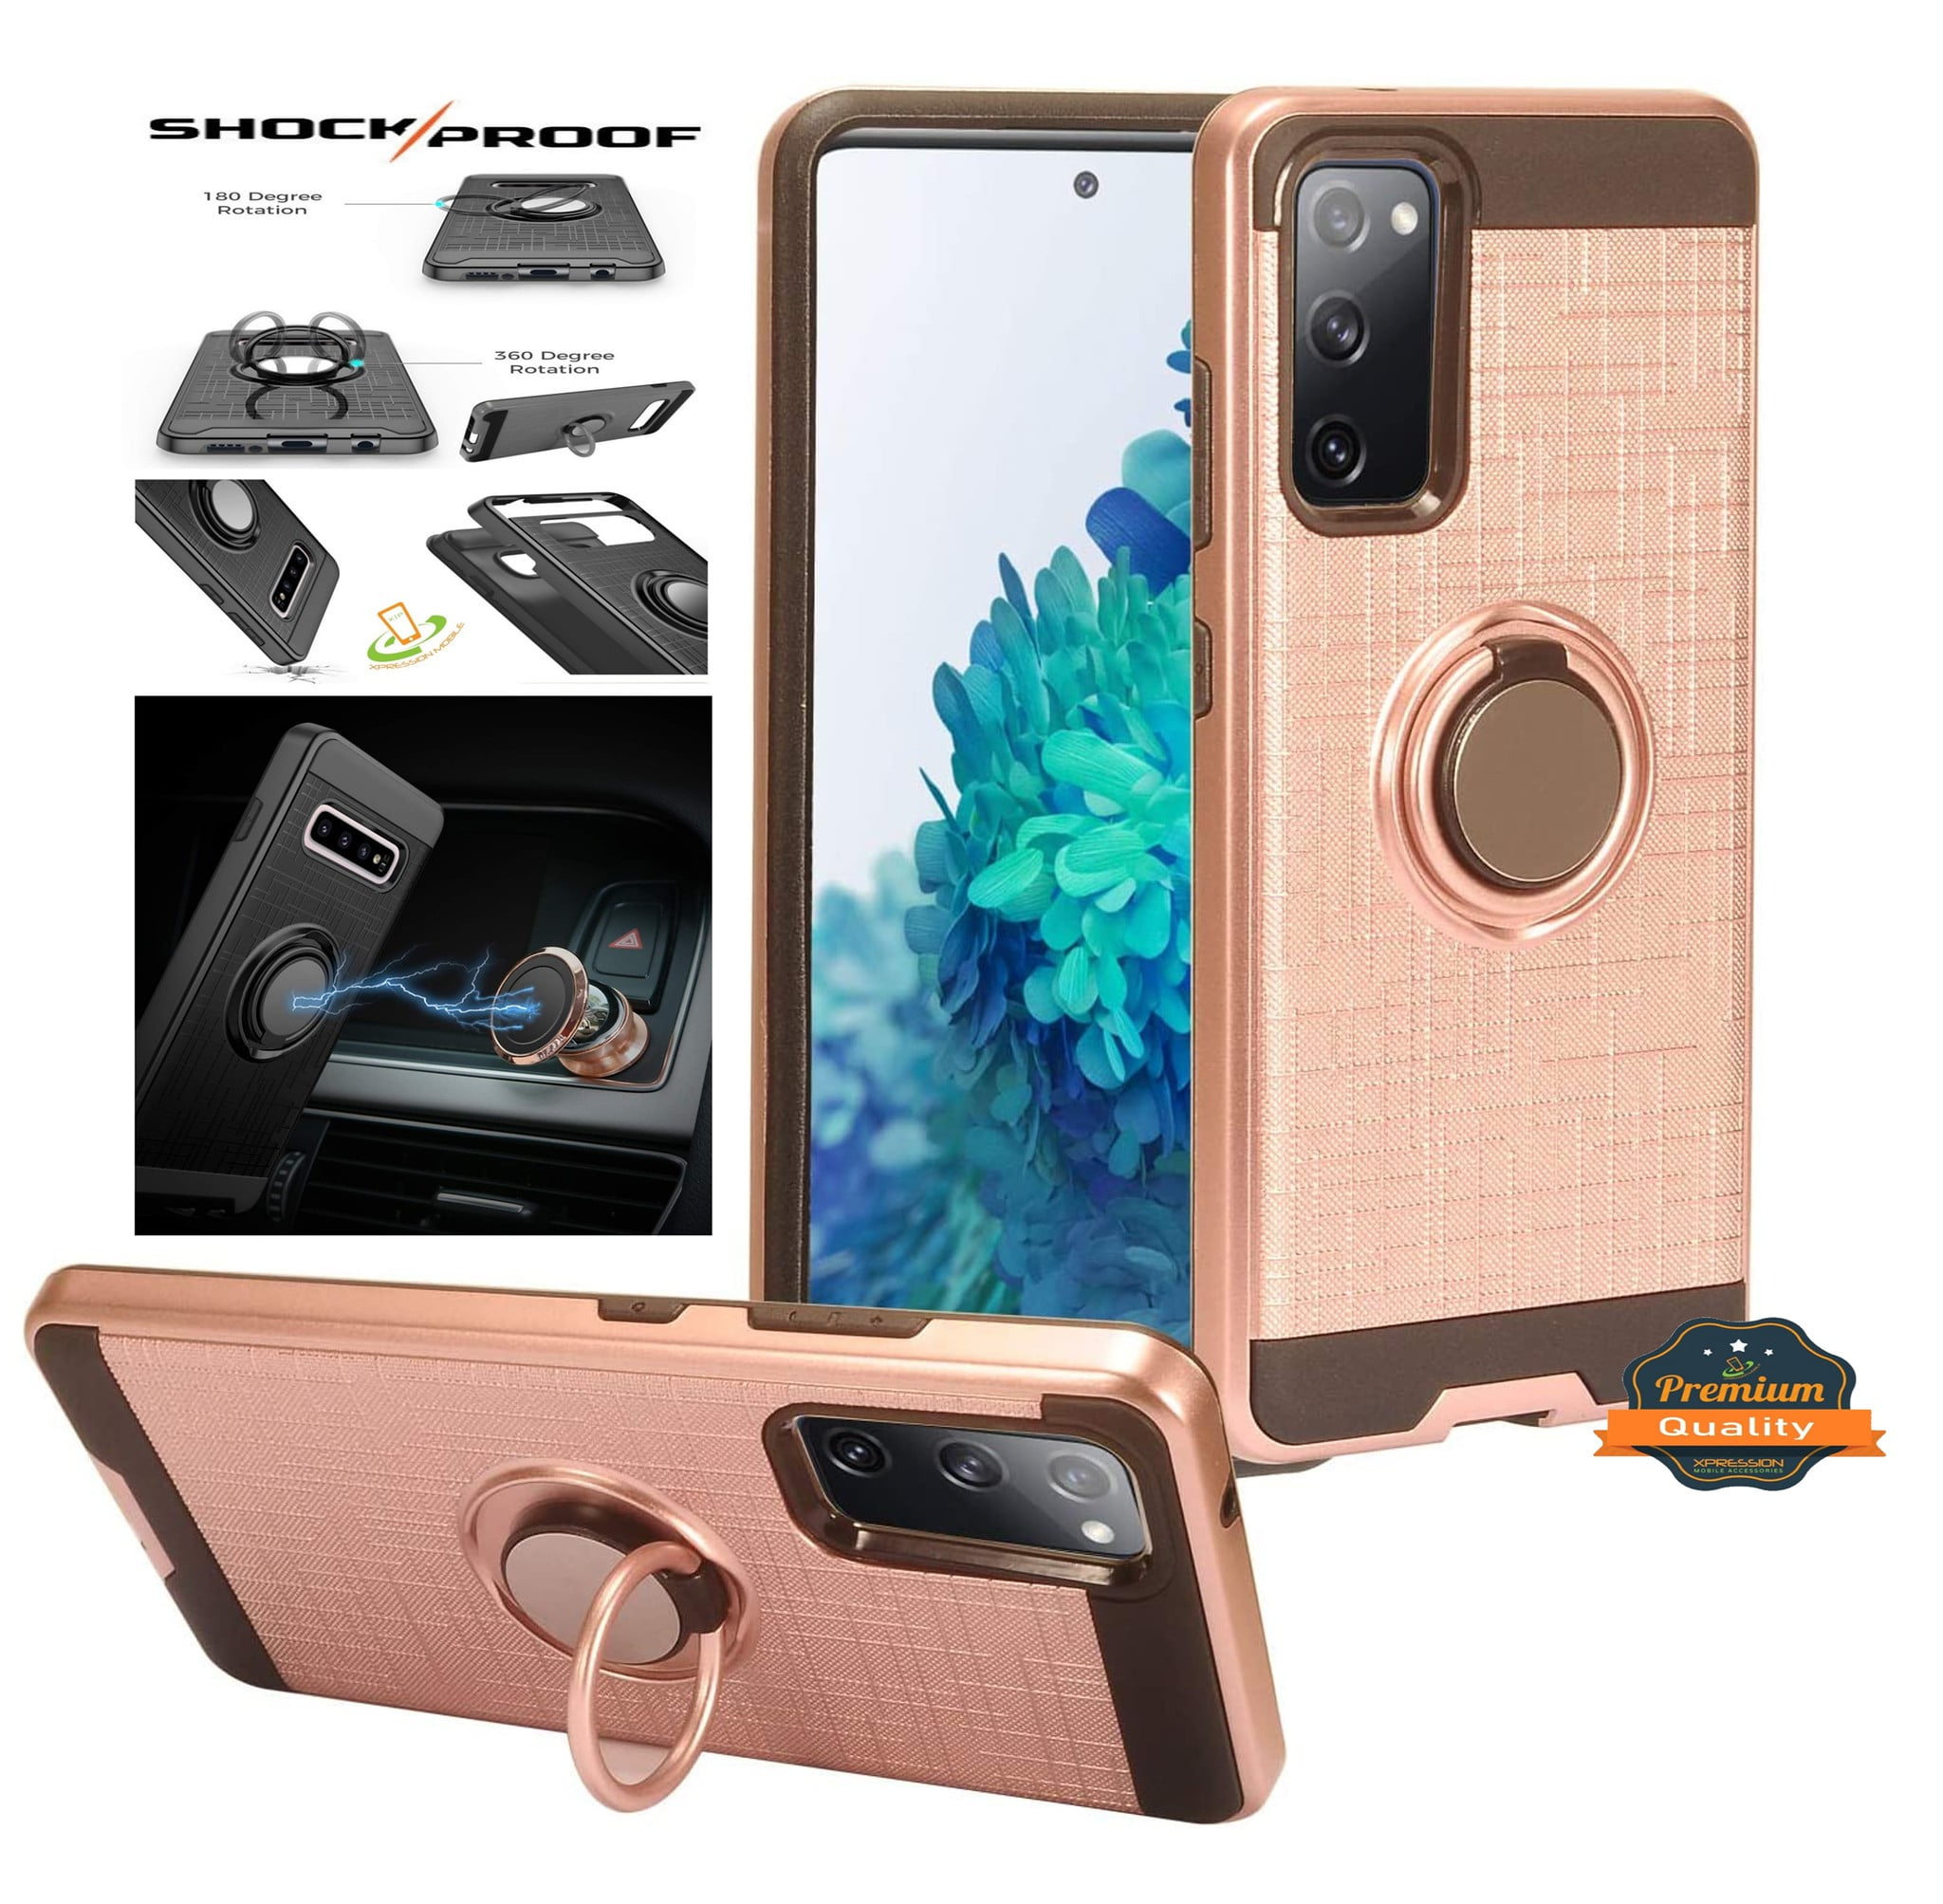 Case Motorola Moto One 5G, Moto G 5G Plus Hybrid Ring Armor Shockproof Dual Layers Rugged 2 in 1 Holder with Ring Stand Cover by Xcell - Rose Gold - Walmart.com